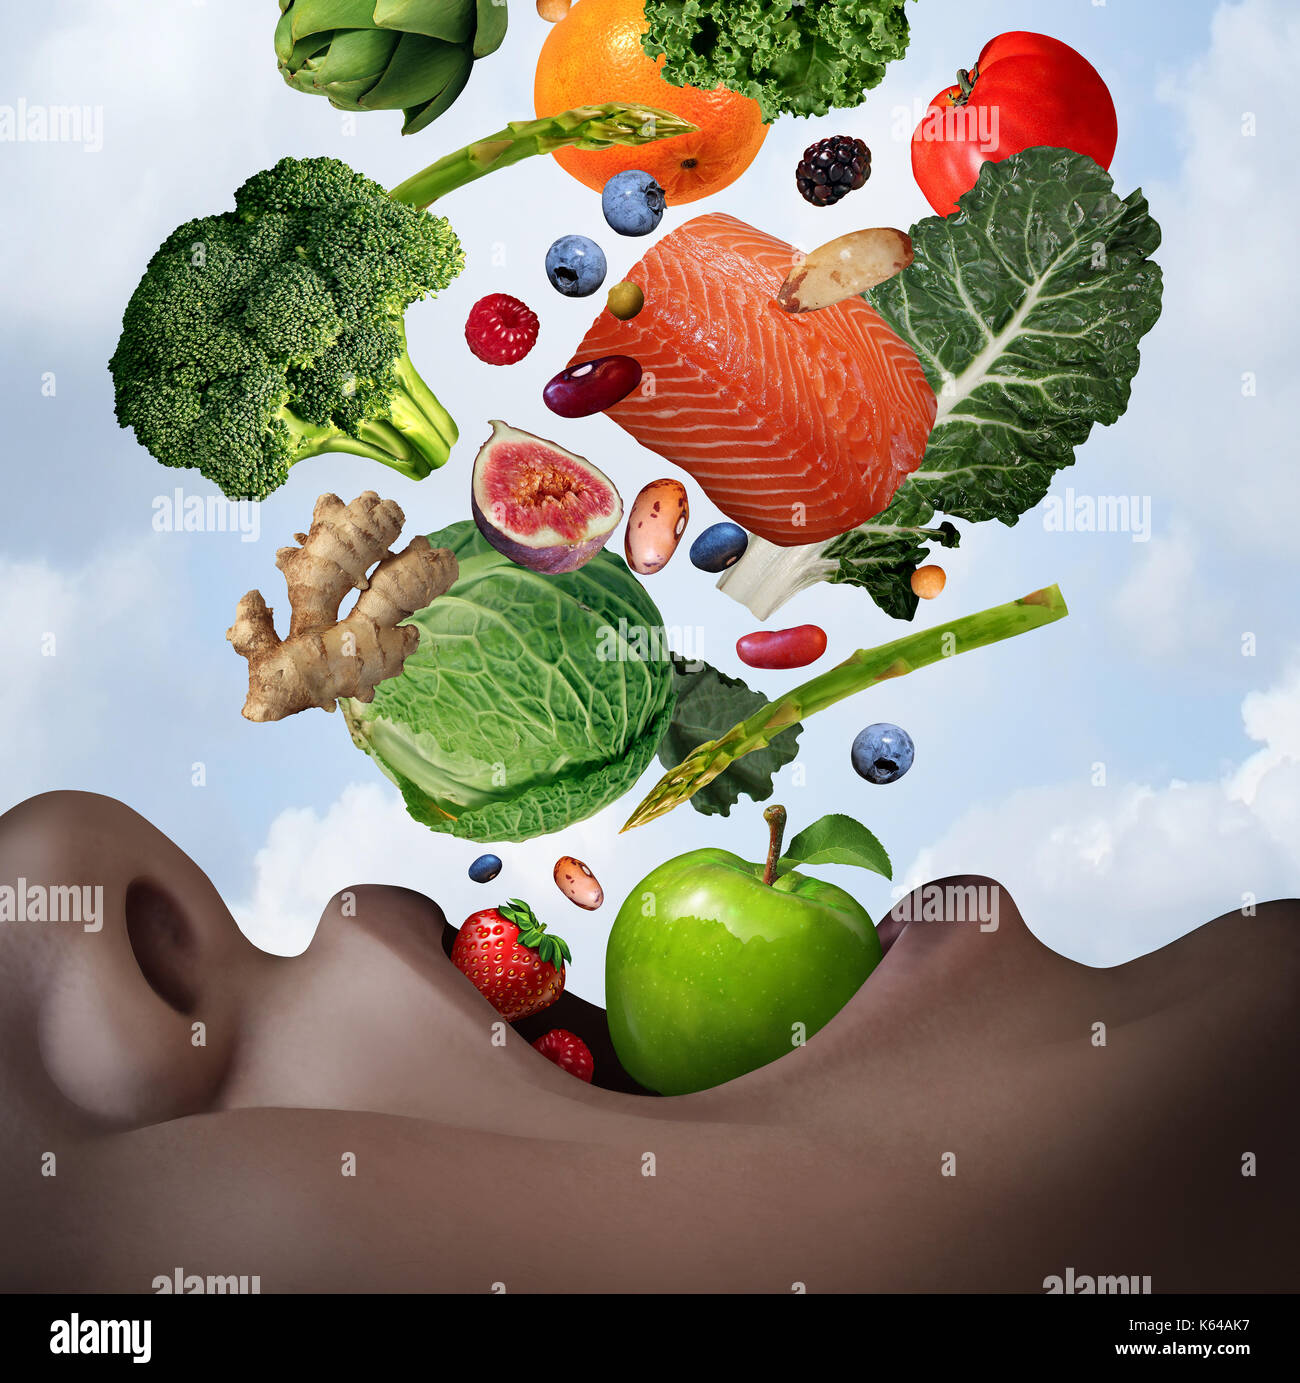 Healthy food diet concept as an open human mouth with nutritious fresh ingredients falling inside as salmon nuts berries beans vegetables and fruit. Stock Photo